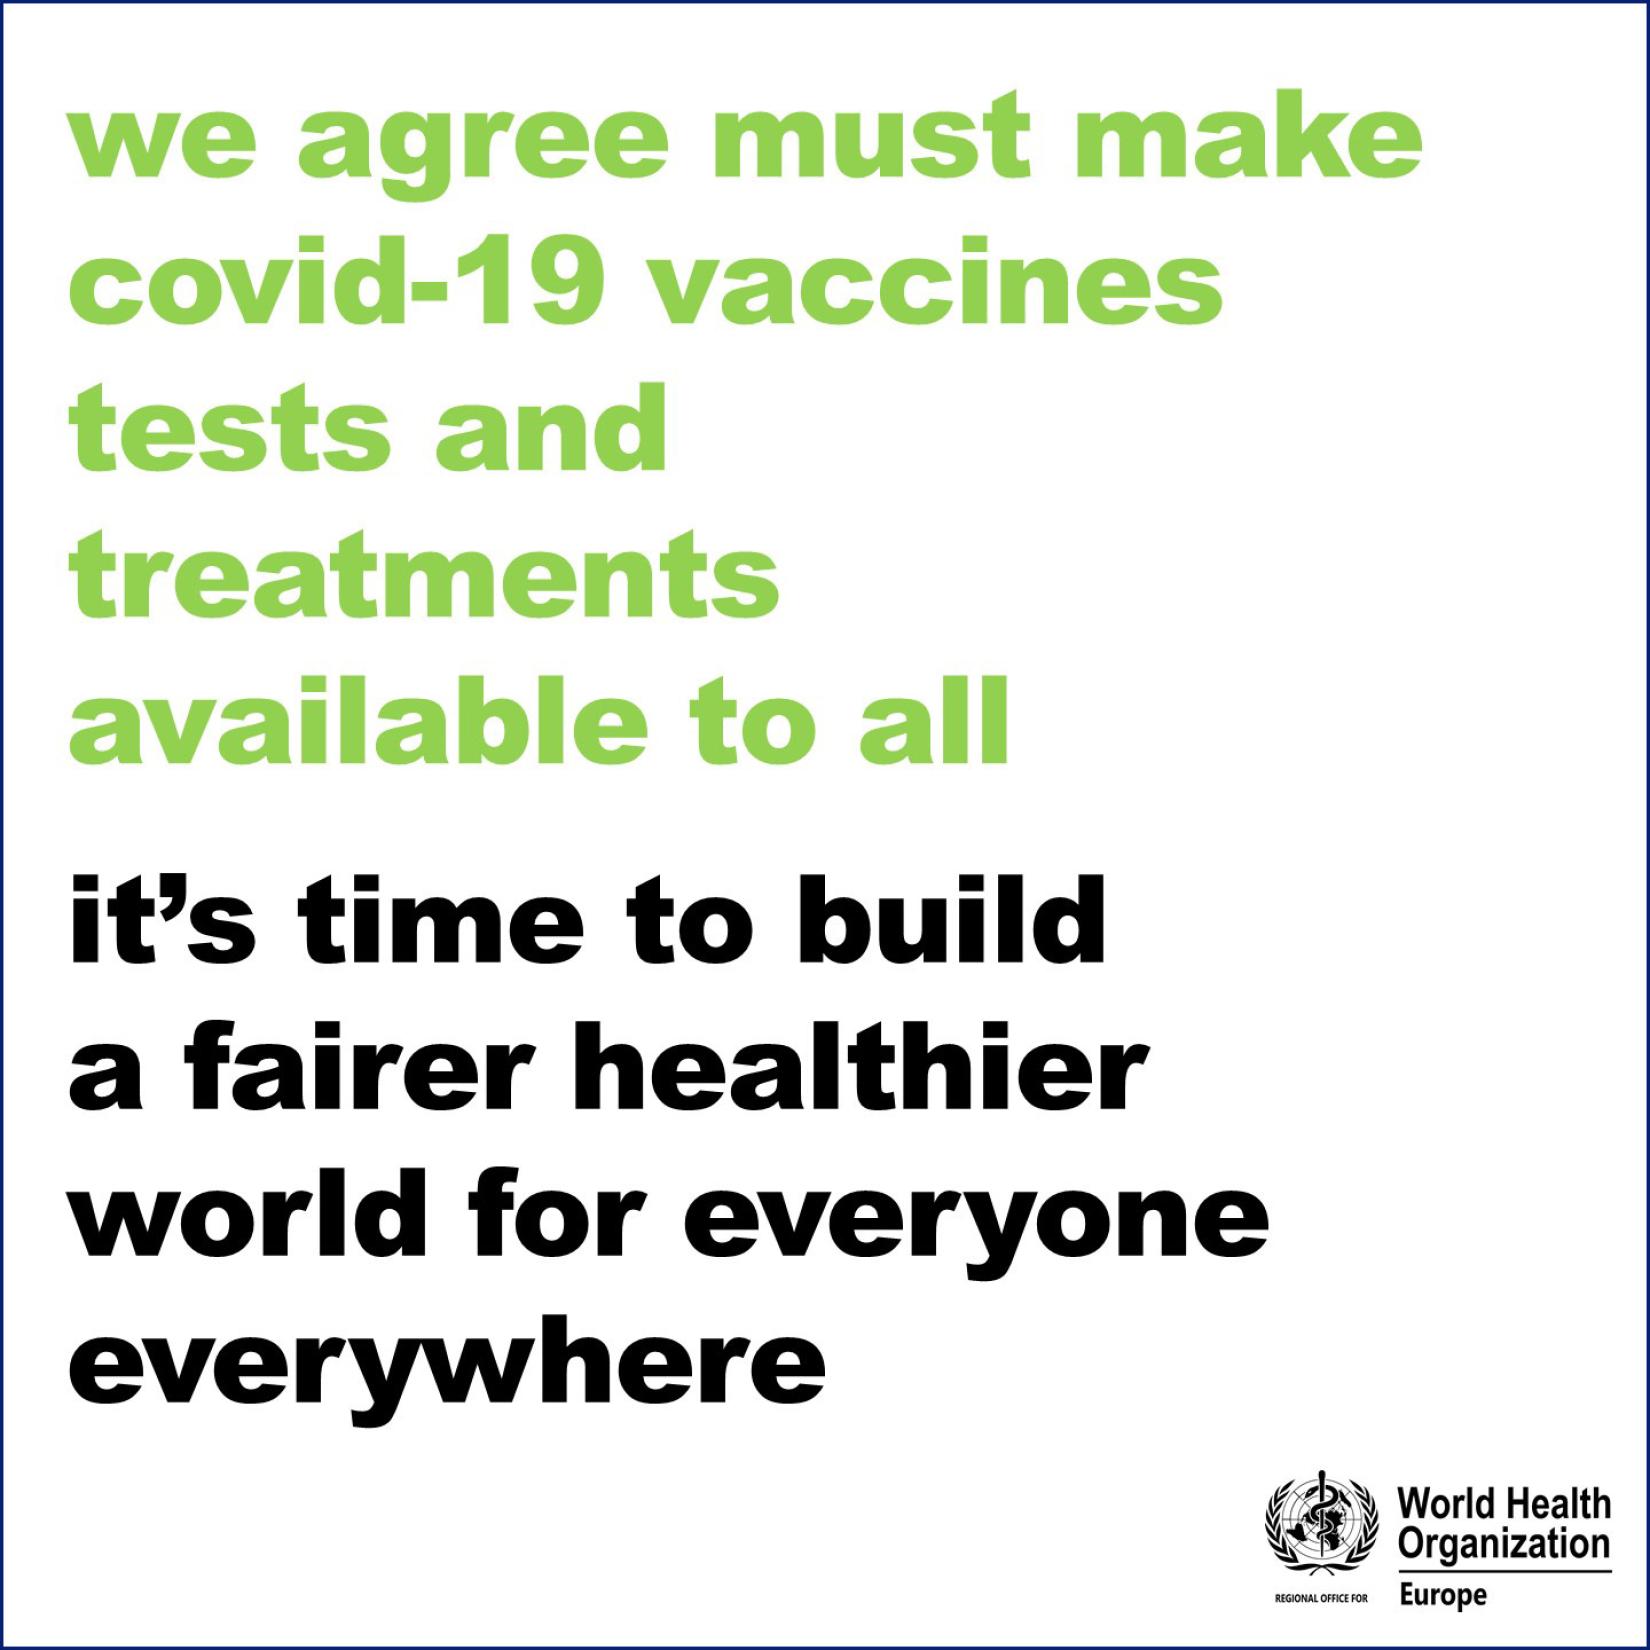 COVID-19 vaccines should be available to all